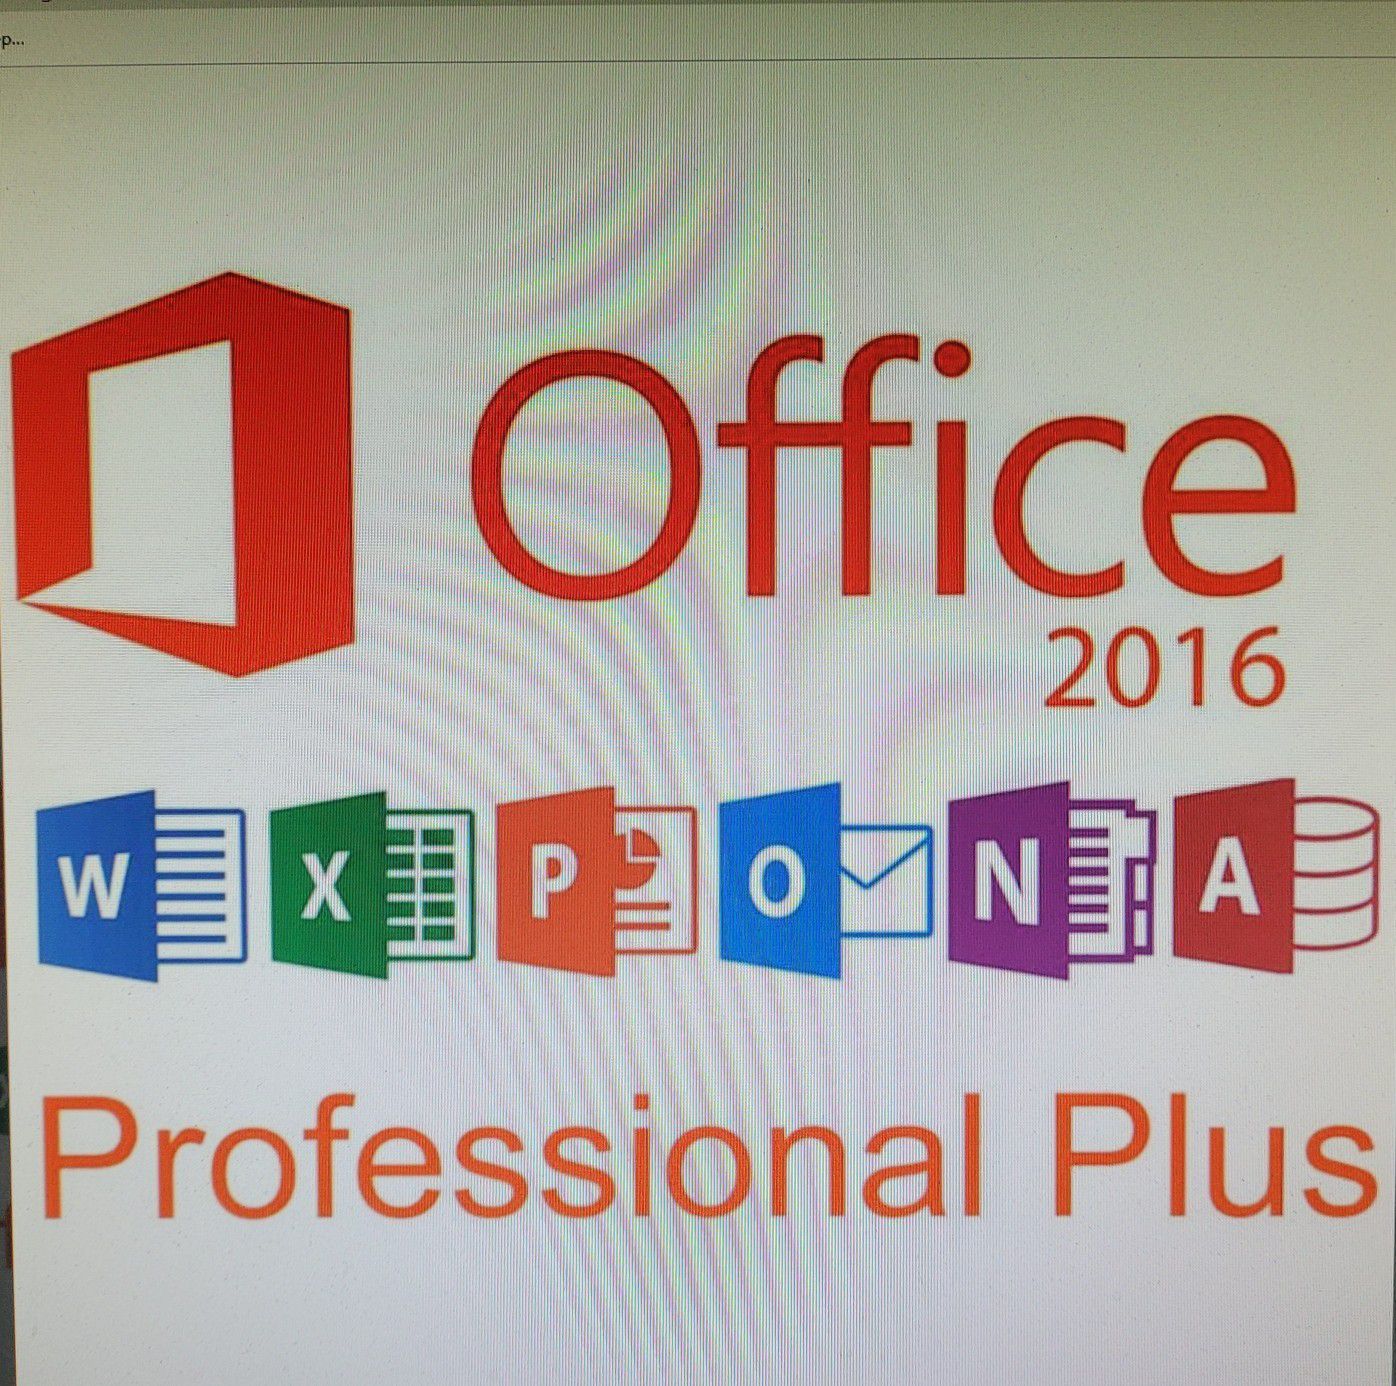 Ms Office 2016 pro plus with dvd to install